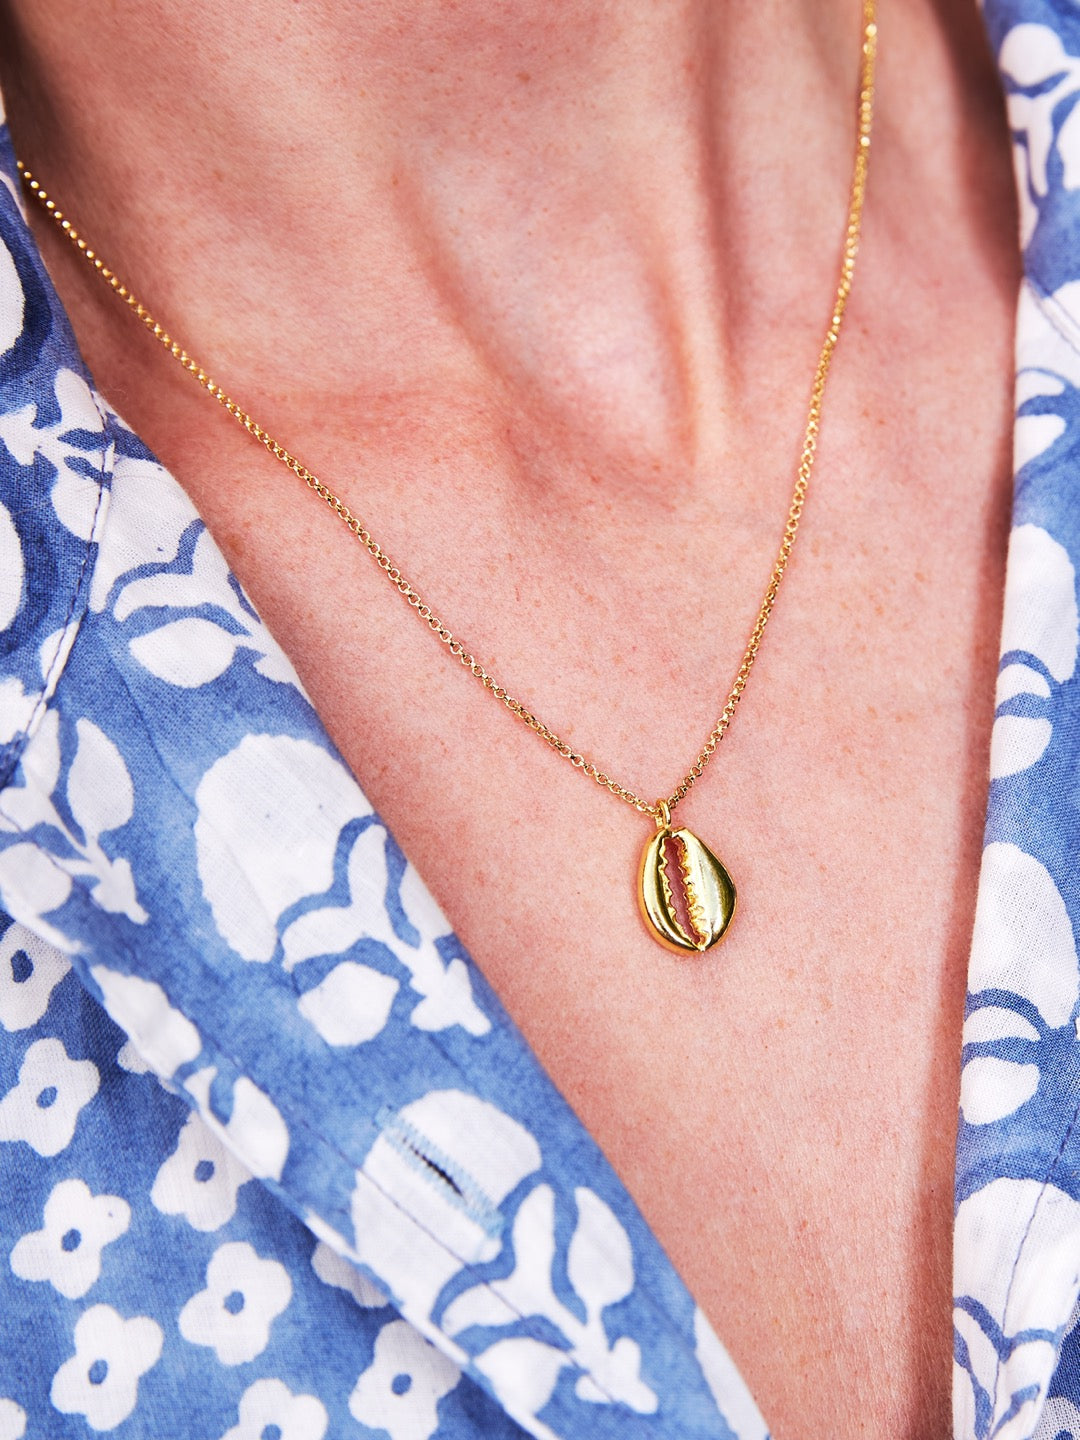 Oceania Necklace - cowrie shell